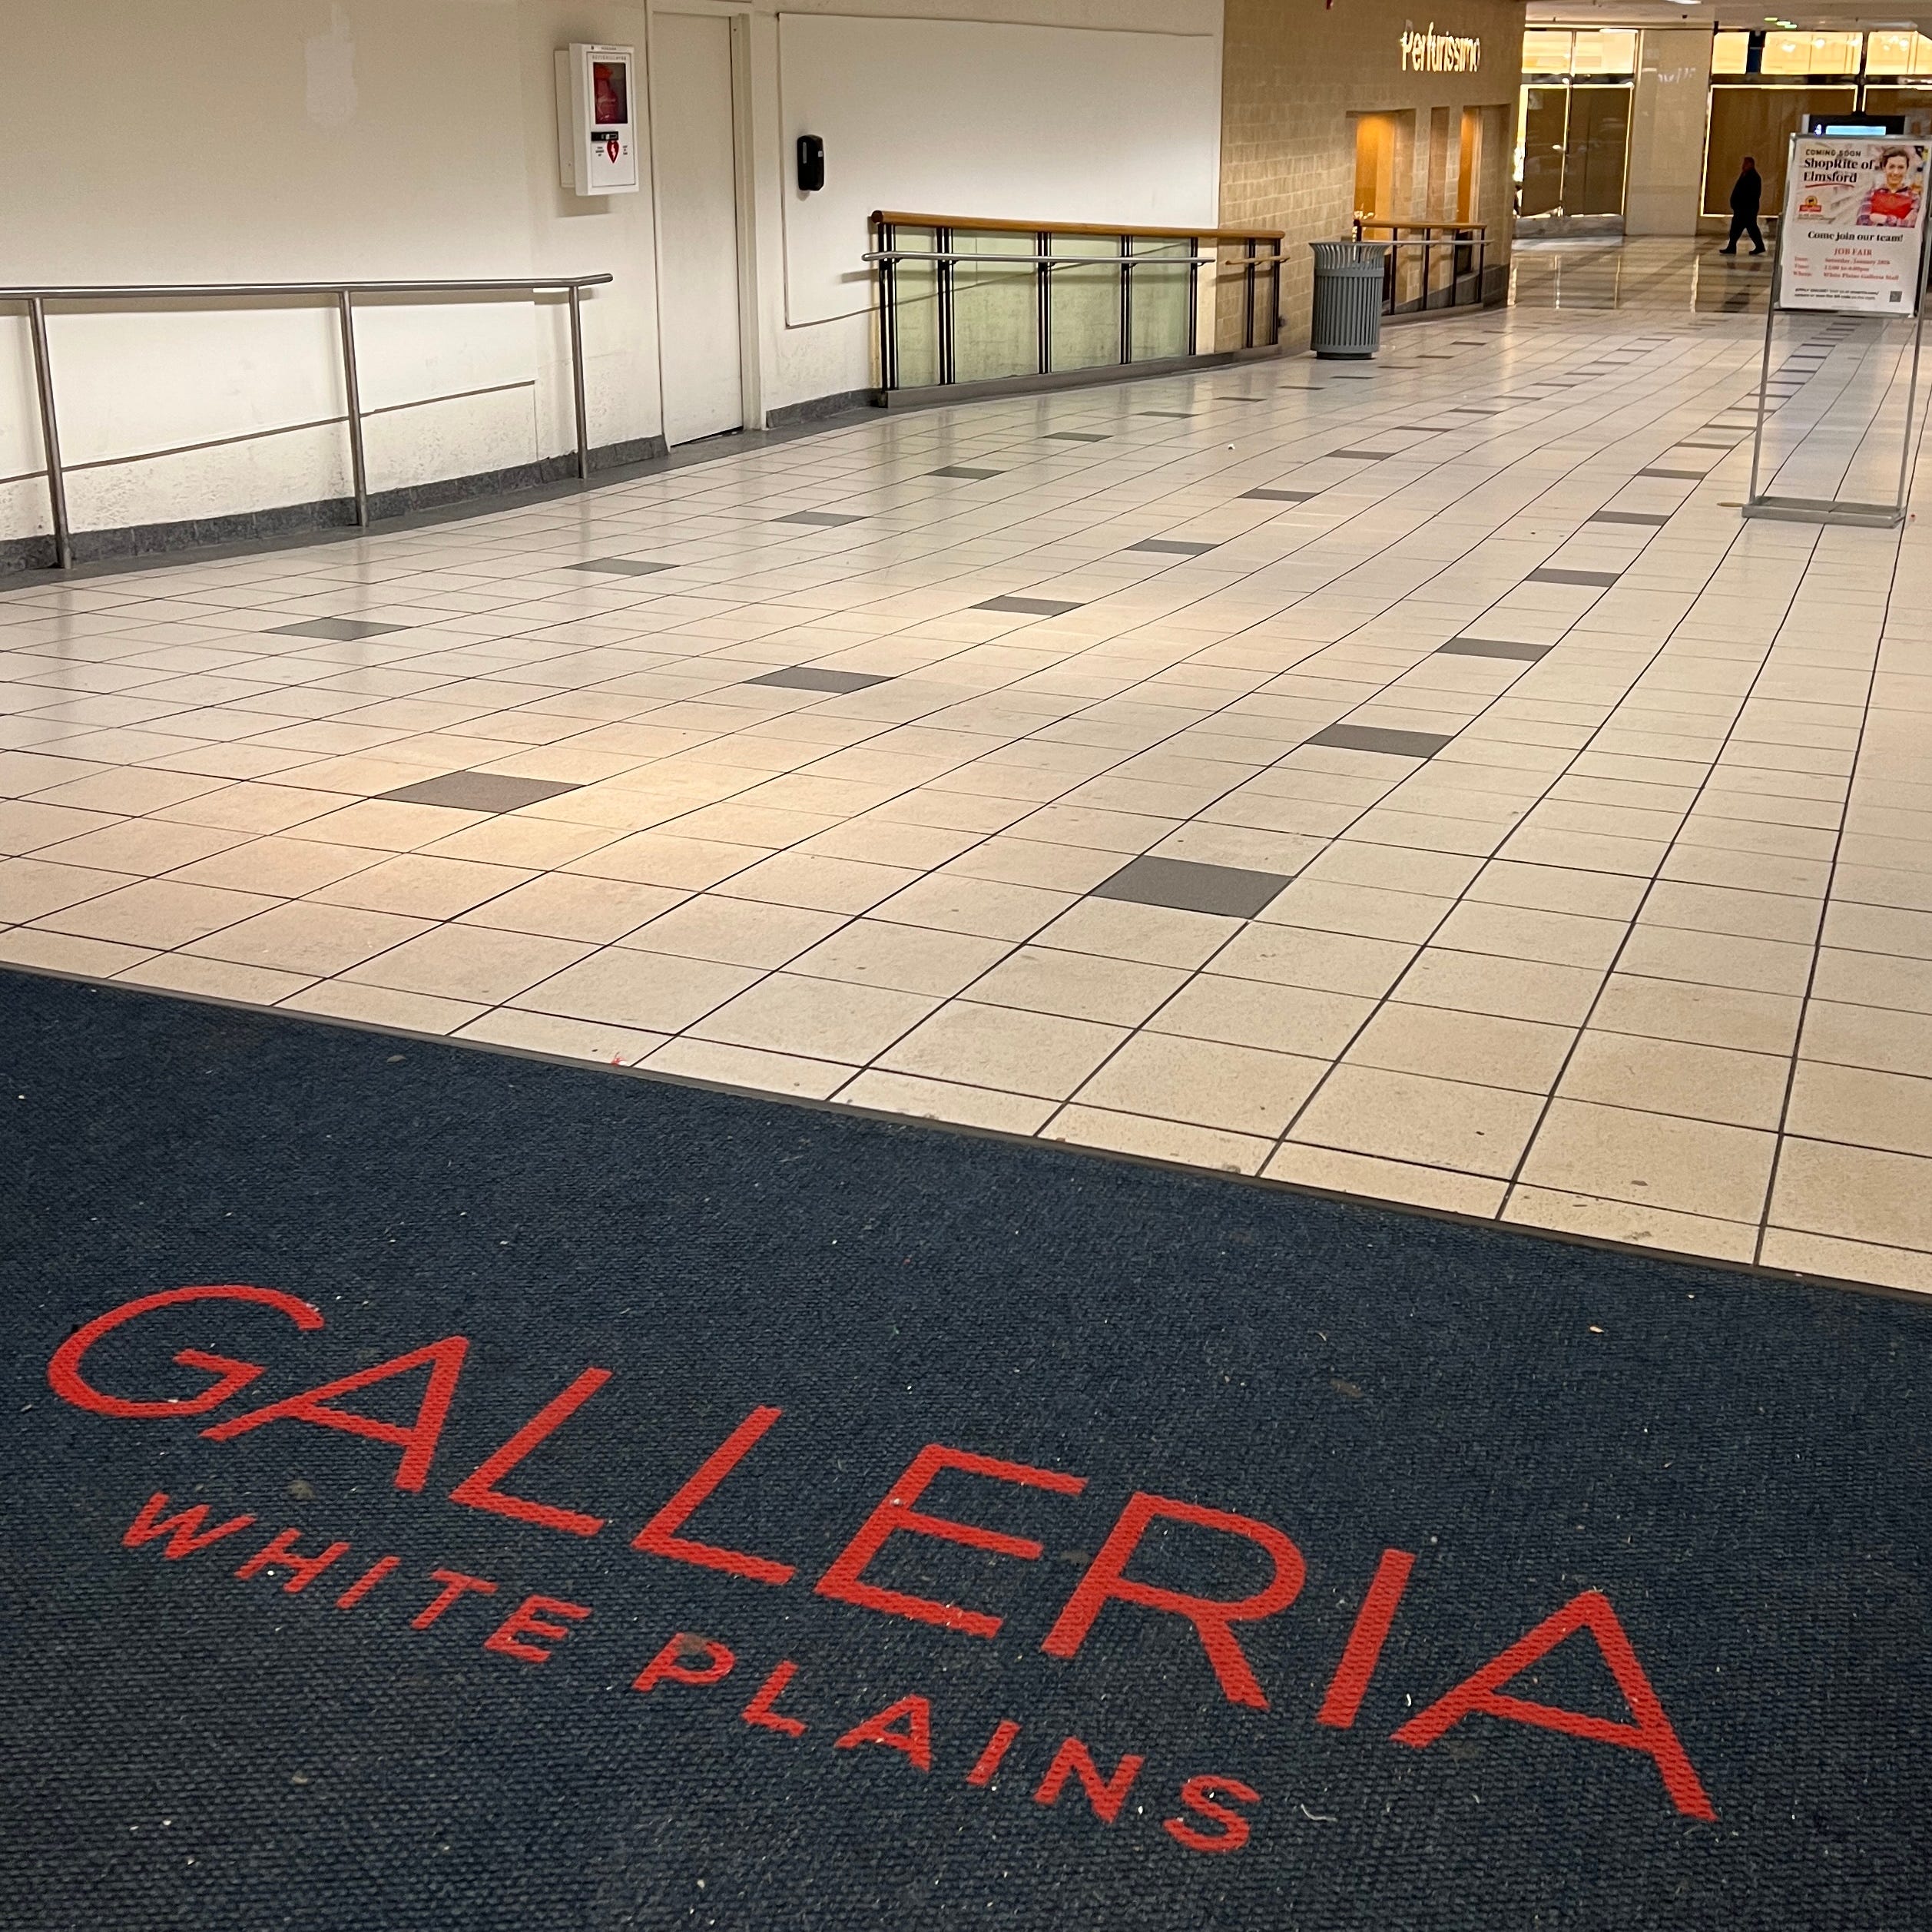 Galleria mall in White Plains to close in March; opened in 1980